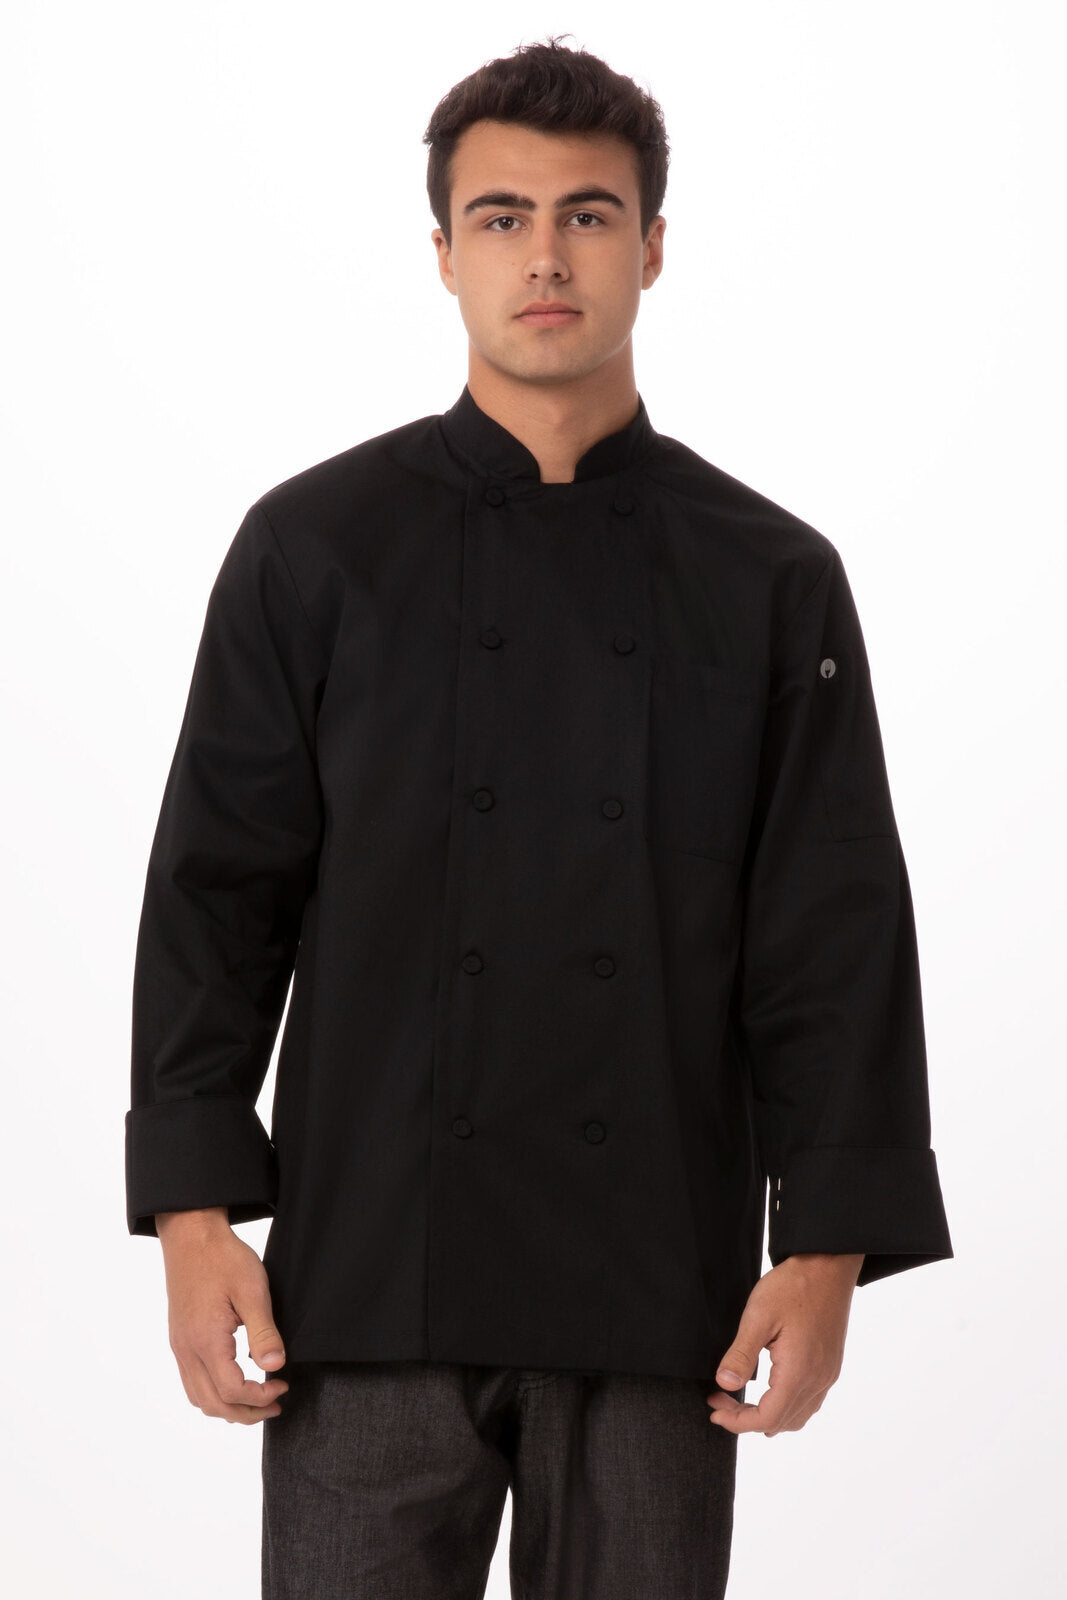 Chef Works Calgary Cool Vent Basic Chef Jacket-(JLLS)